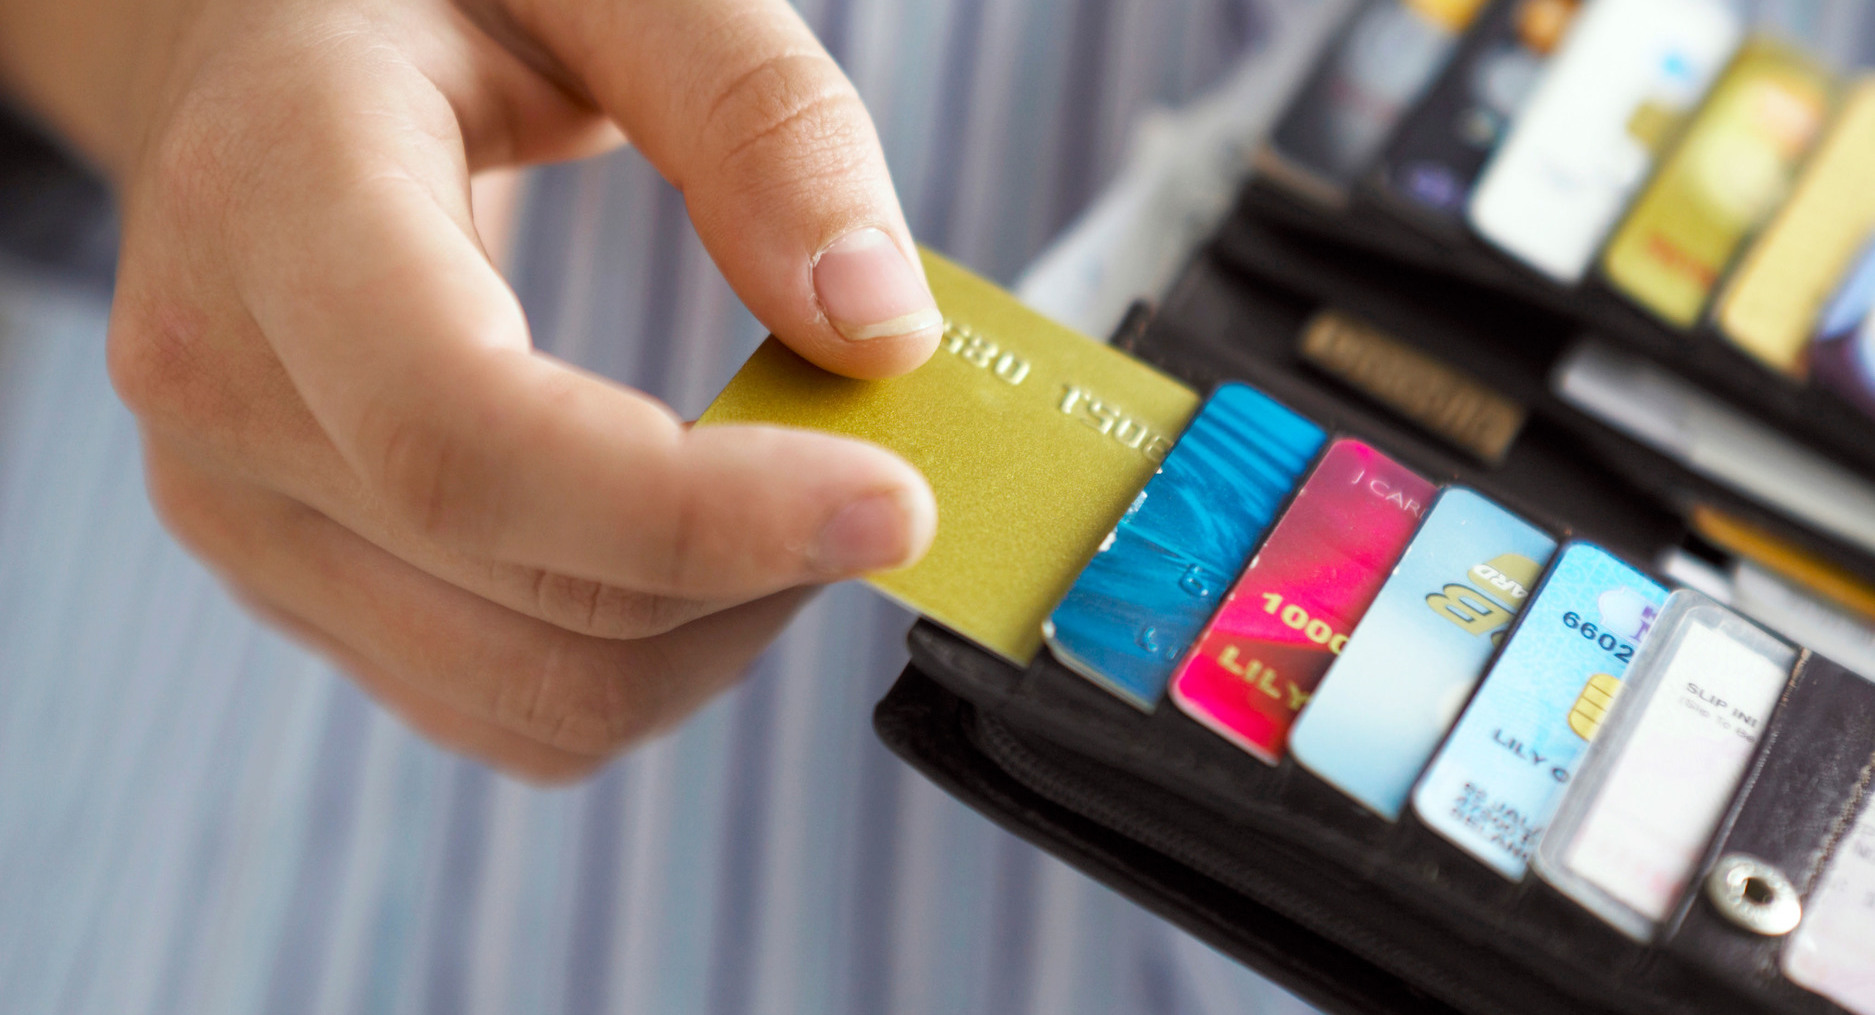 Read This To Know The Best Credit Card For Grocery Shopping & Fuel